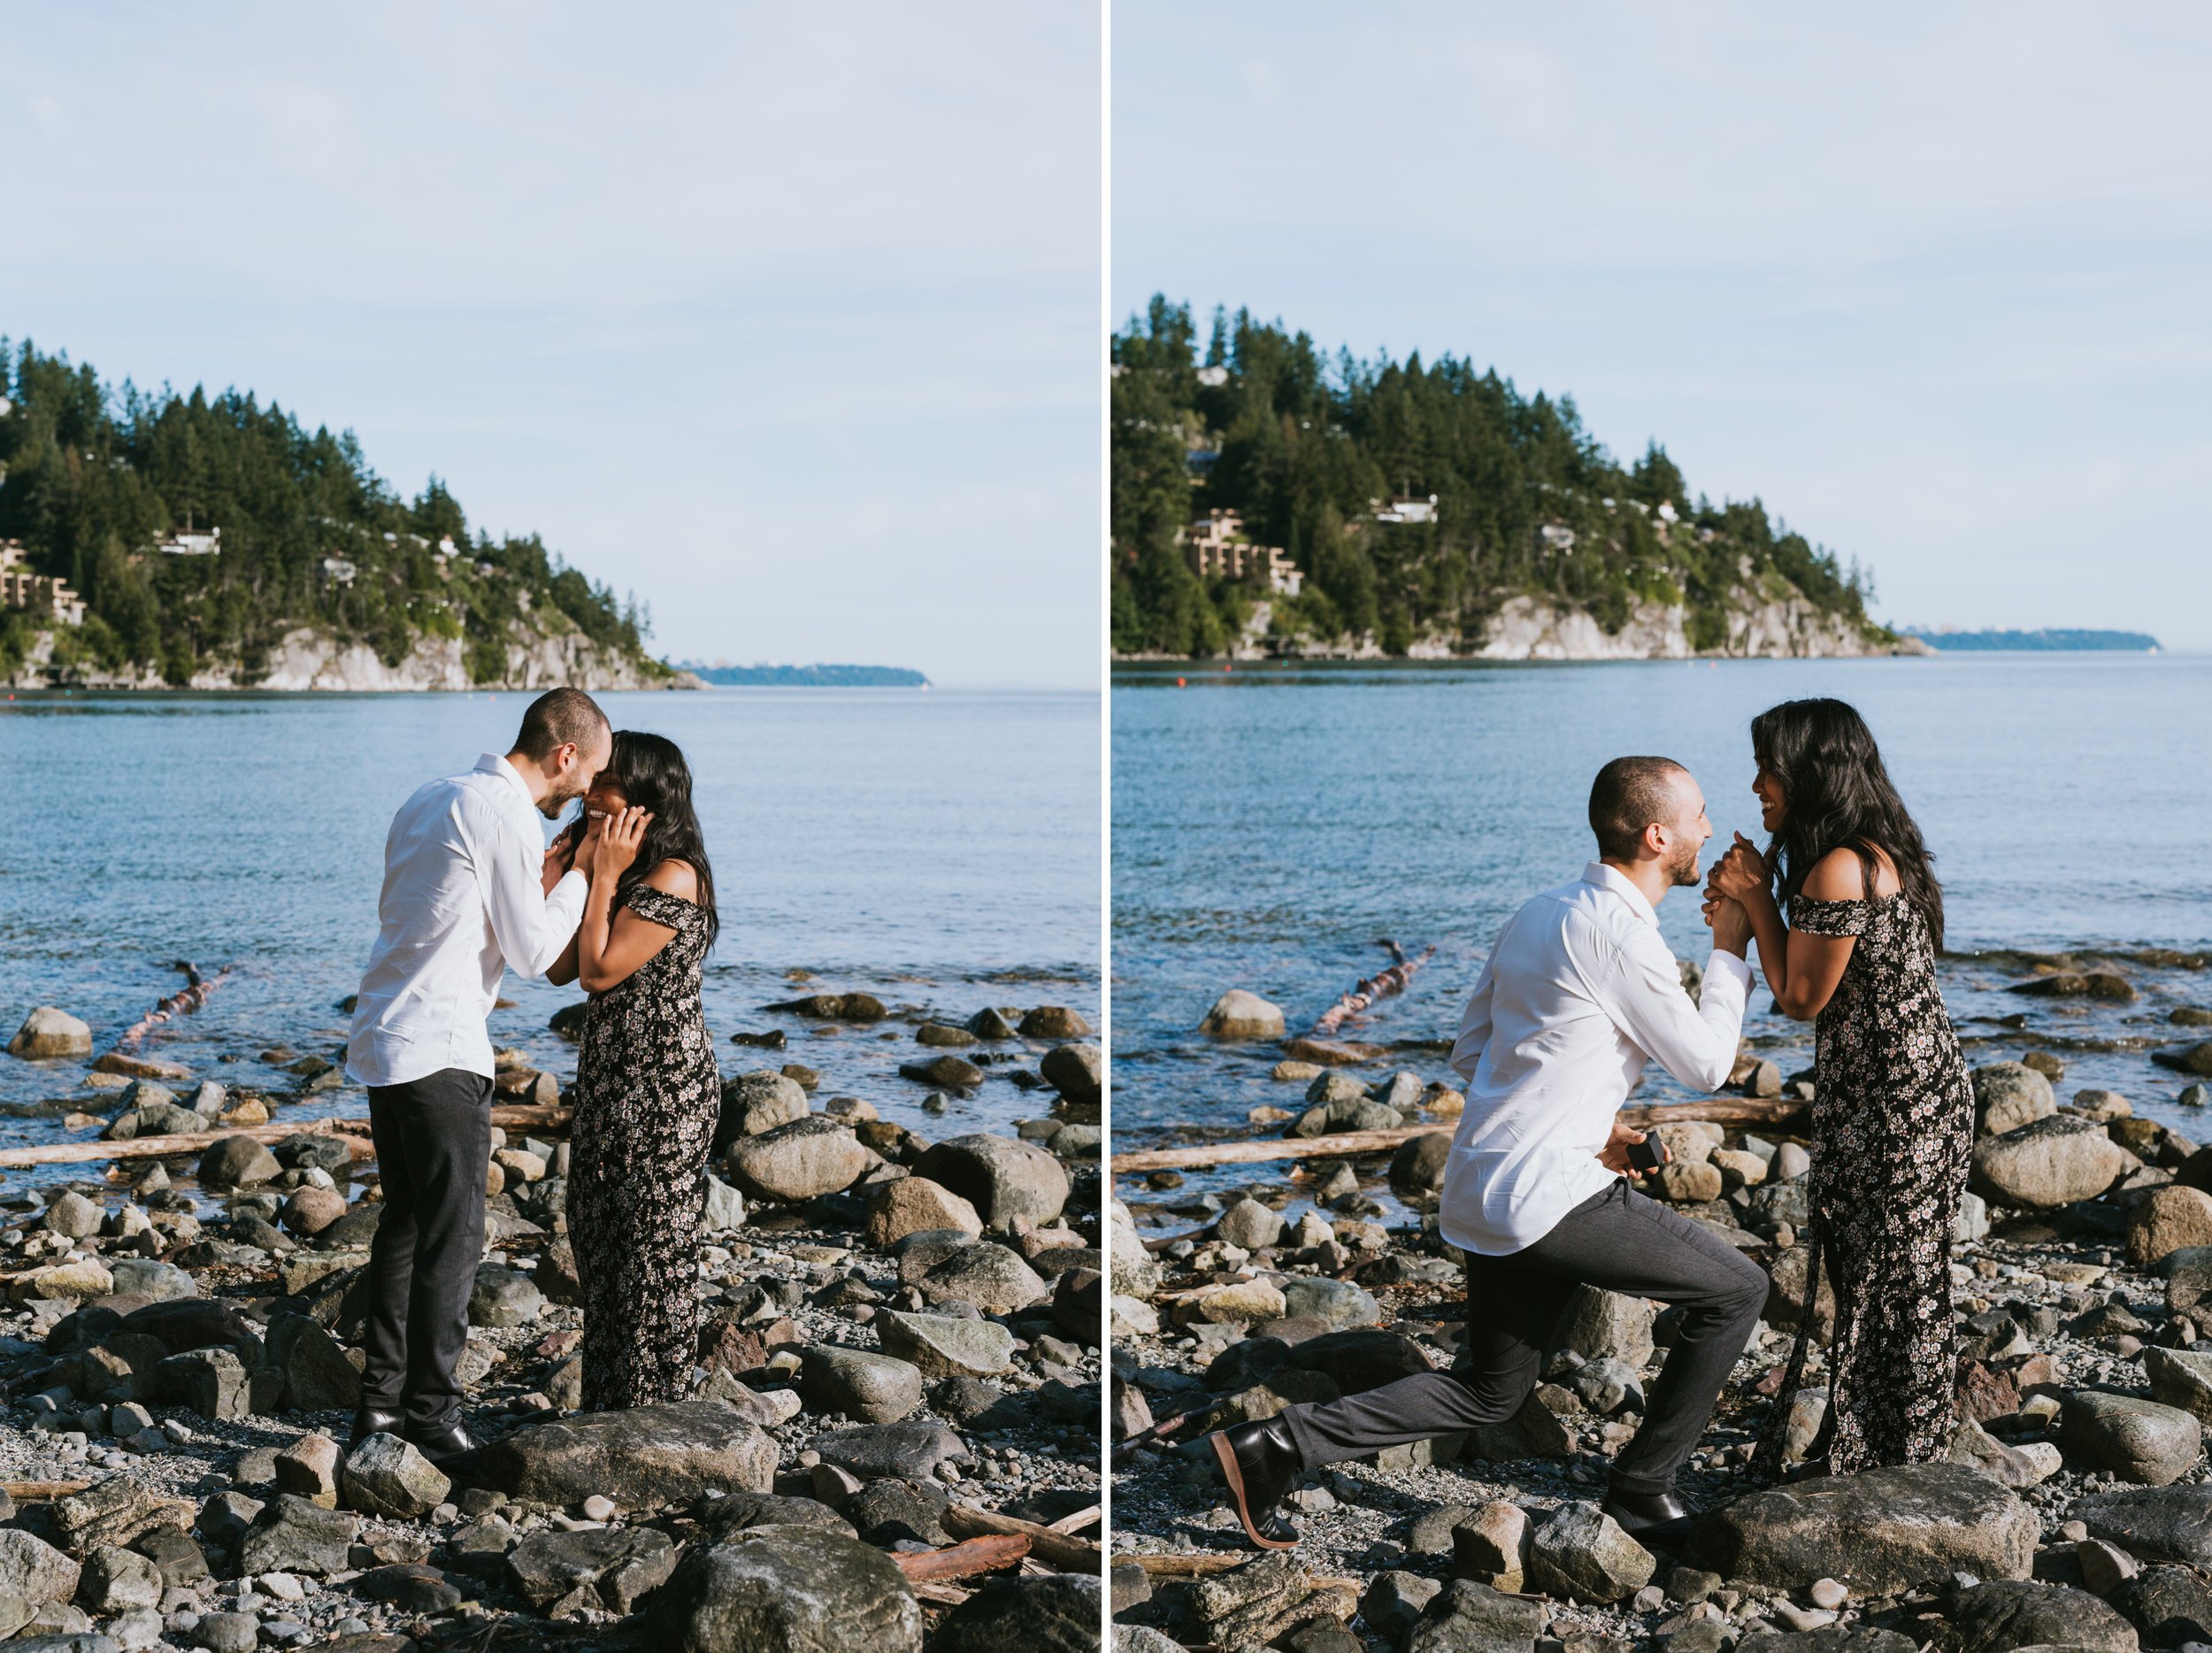 oliver-rabanes-vancouver-surrey-whytecliff-park-proposal-engagement-photography-12.jpg